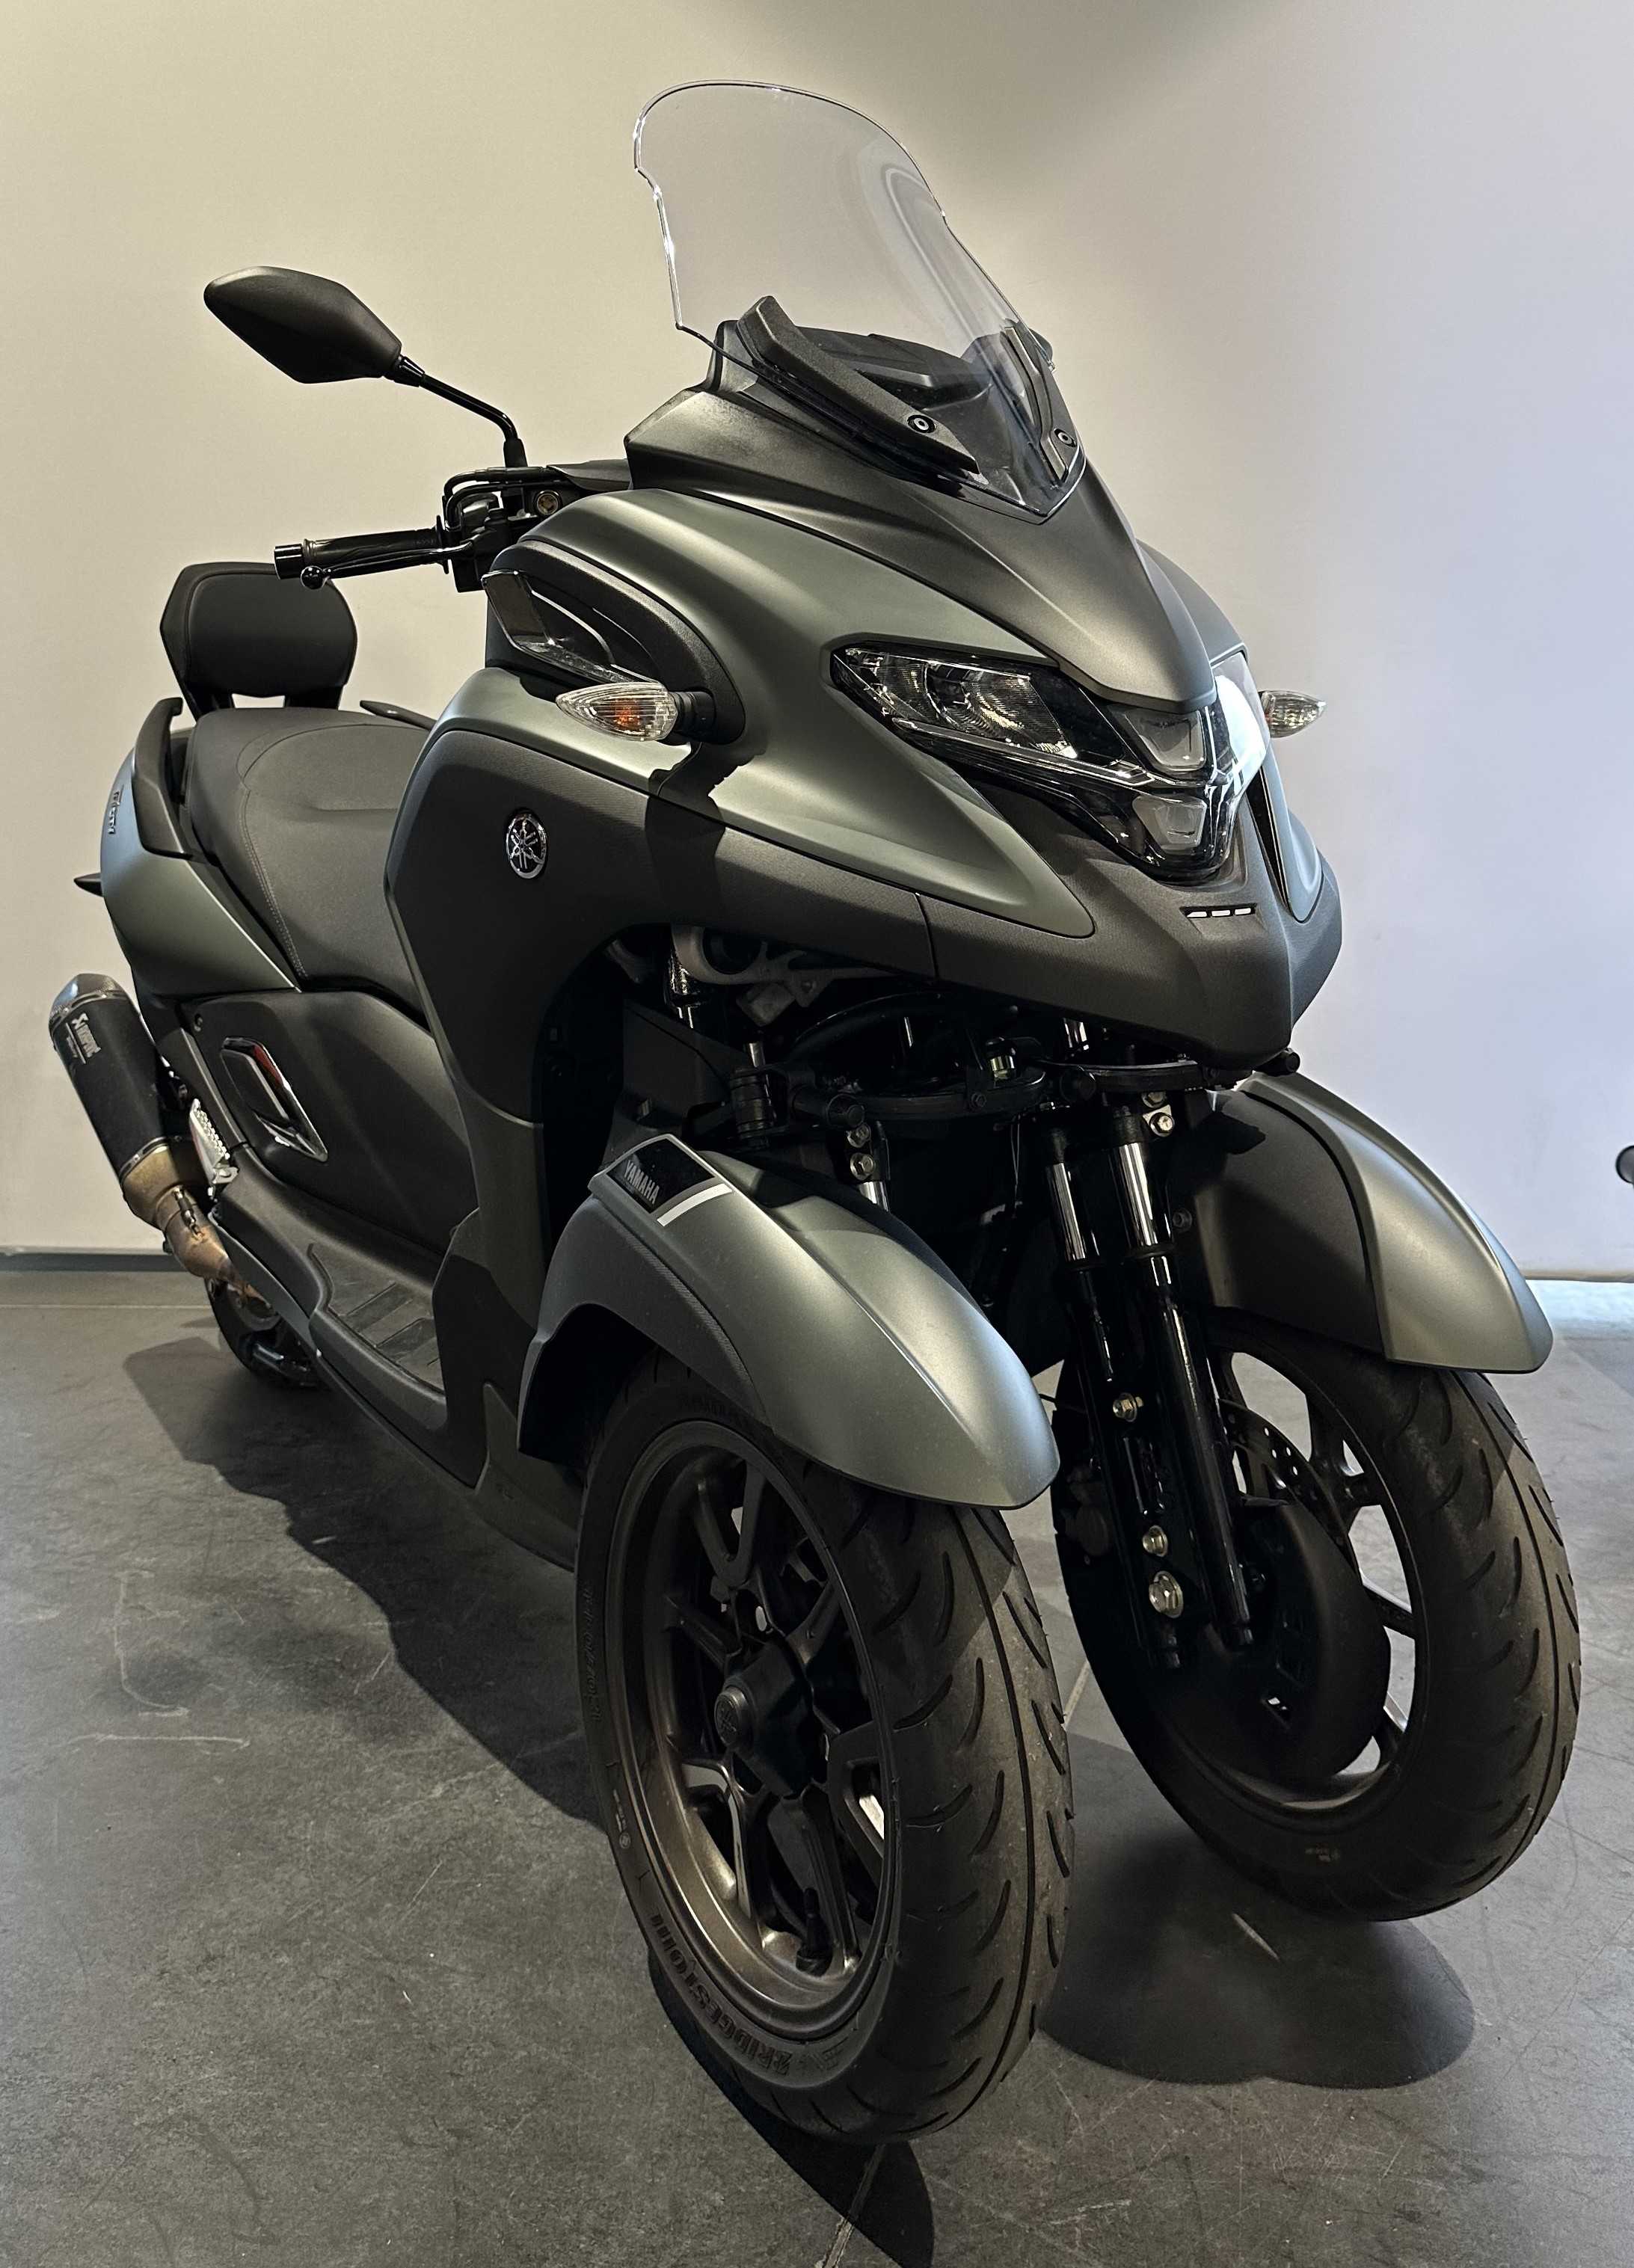 Yamaha MWD 300 Tricity 2021 HD vue 3/4 droite